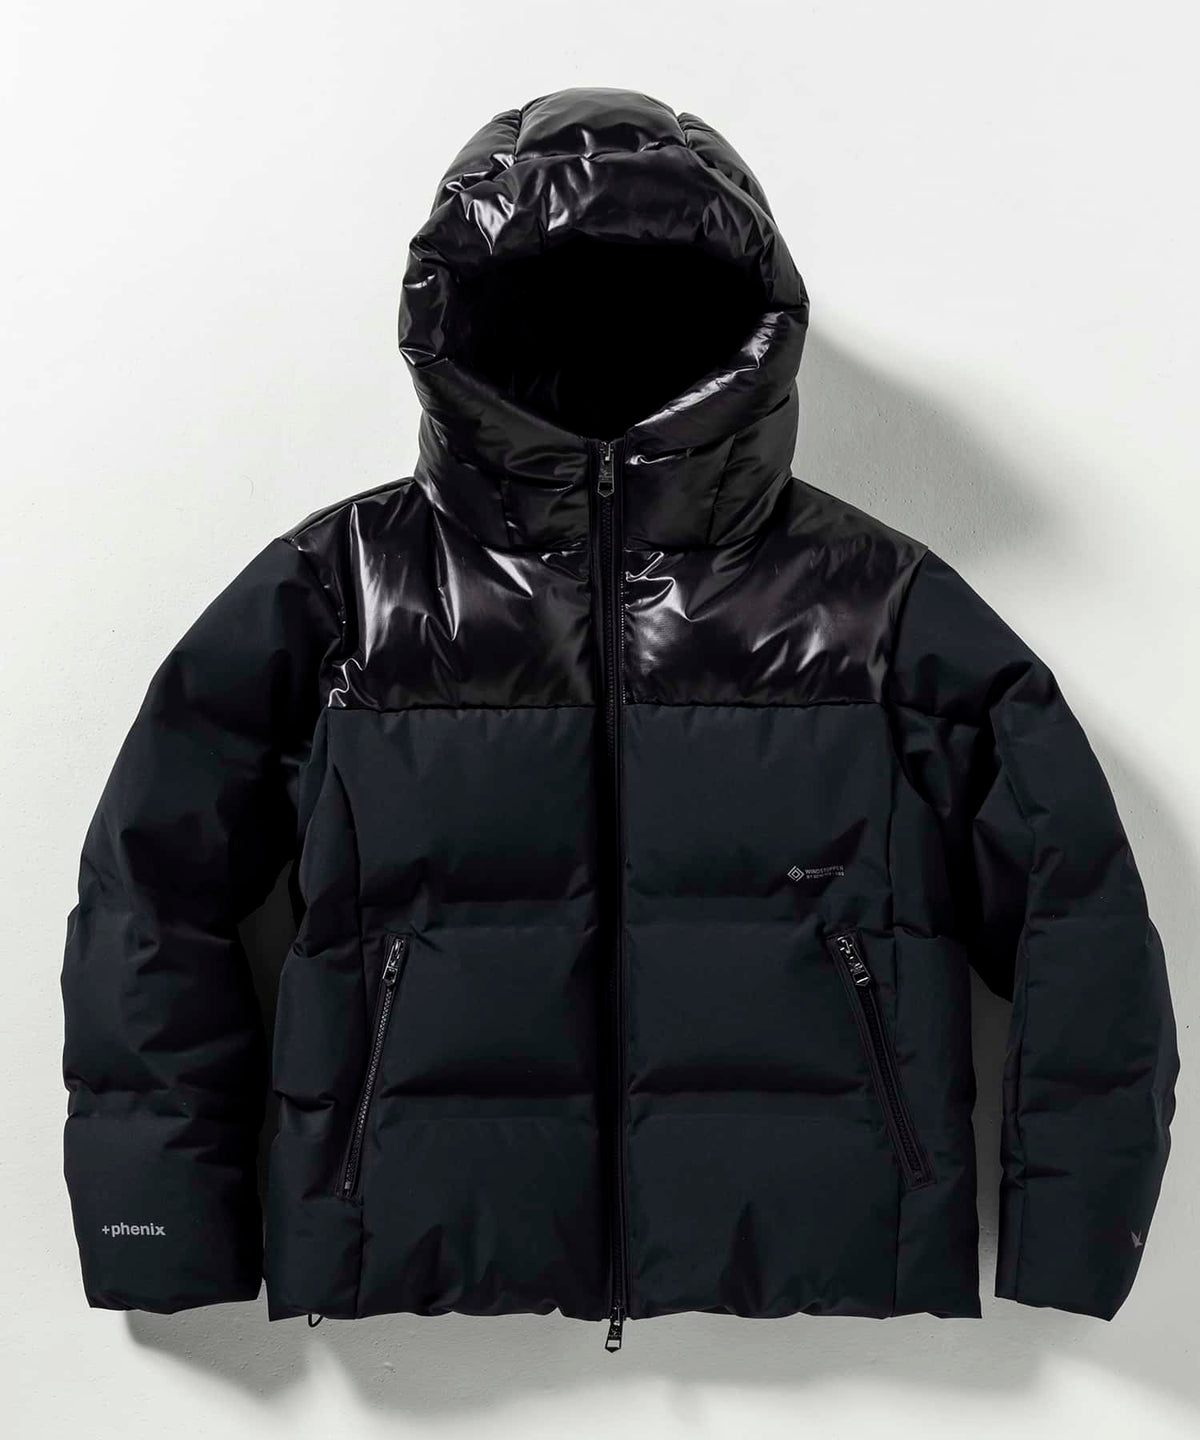 MENS】コンビダウンジャケット WINDSTOPPER(R) プロダクト by GORE-TEX